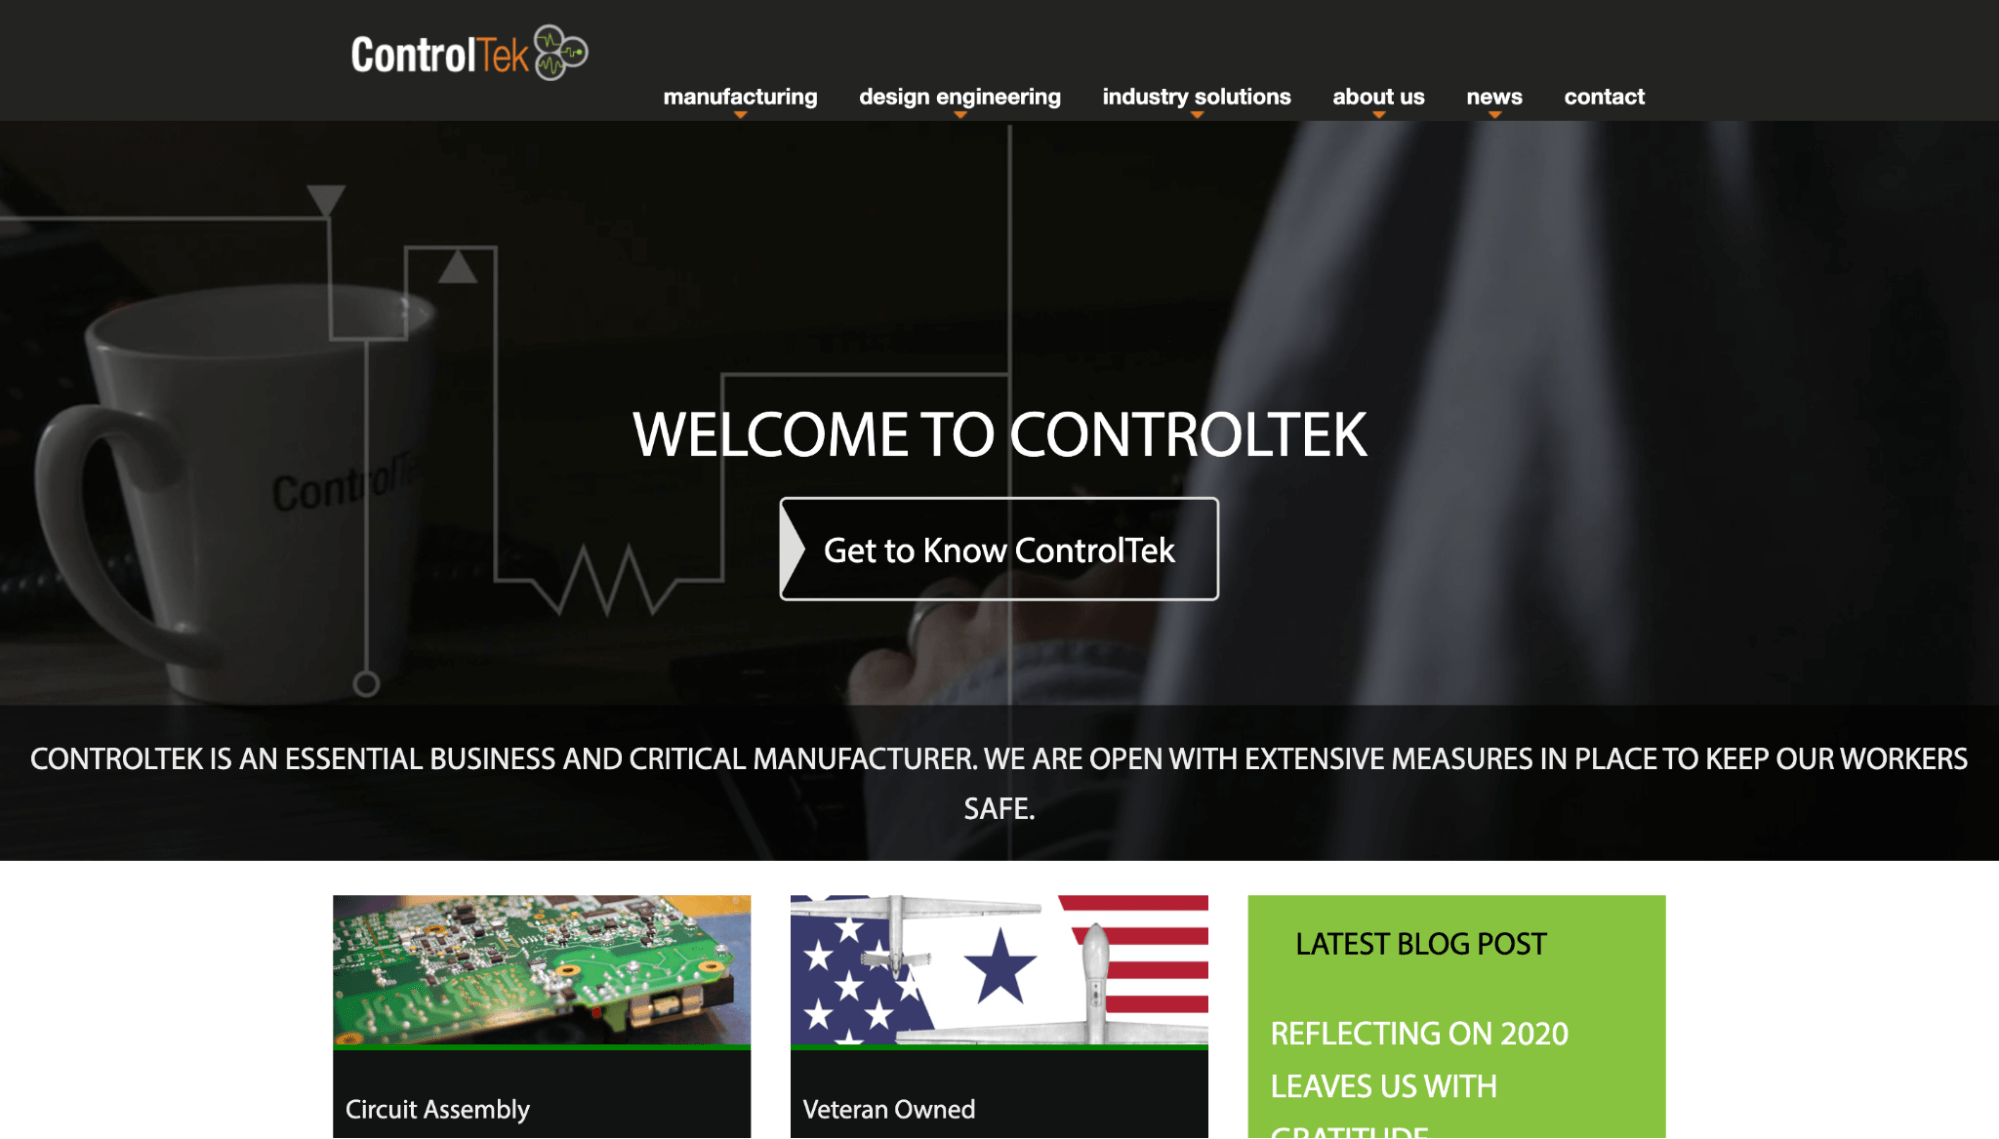 ControlTek homepage: Welcome to ControlTek.